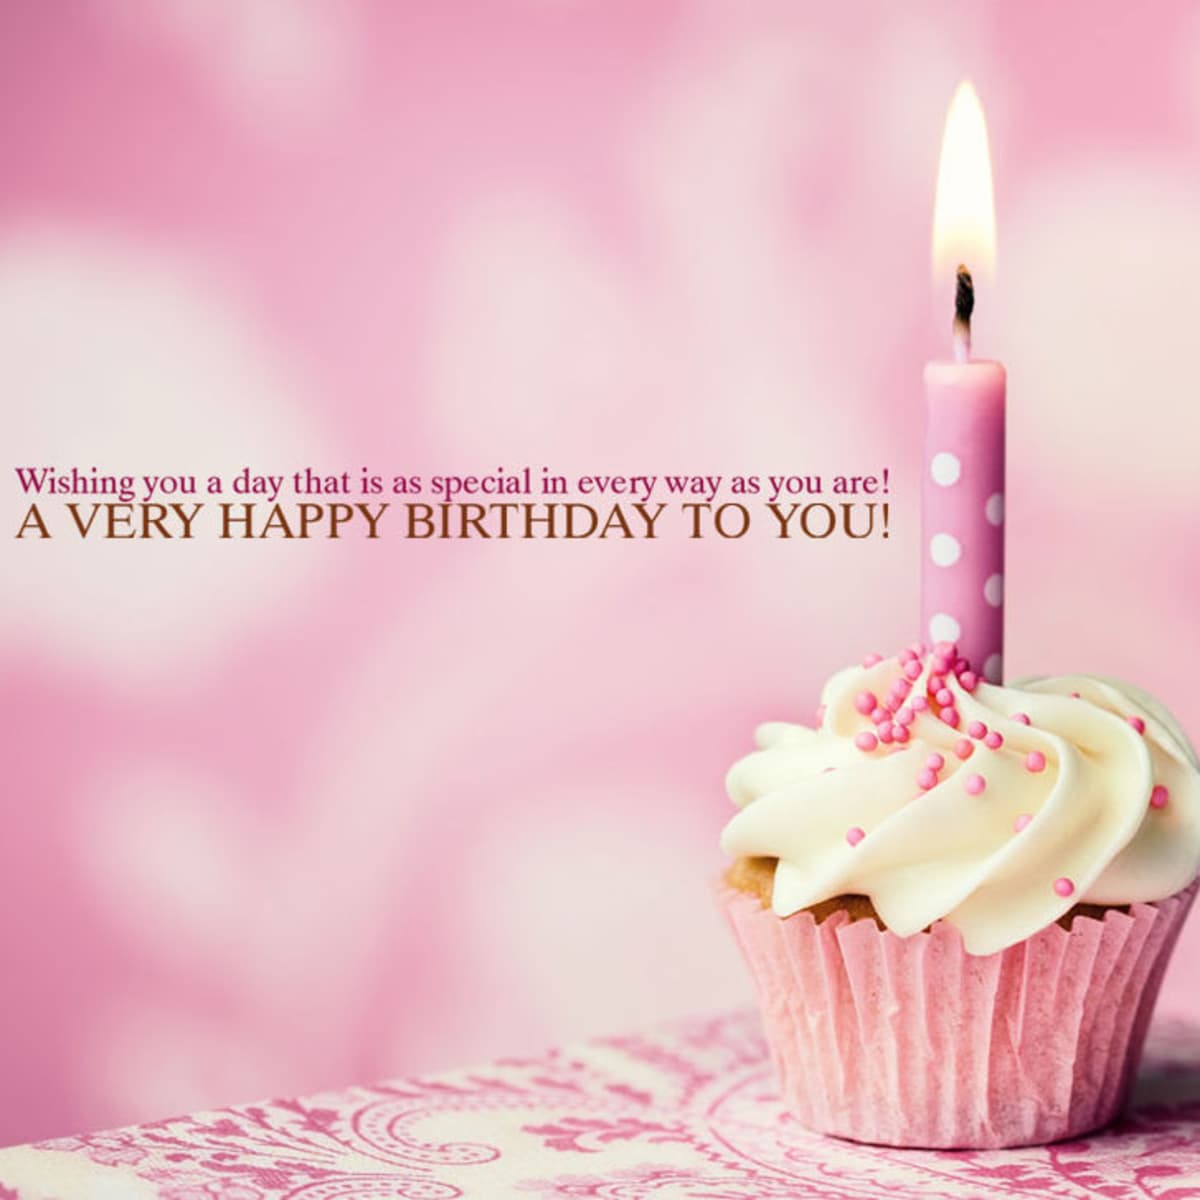 Happy Birthday Wishes and Quotes for Your Sister - HubPages